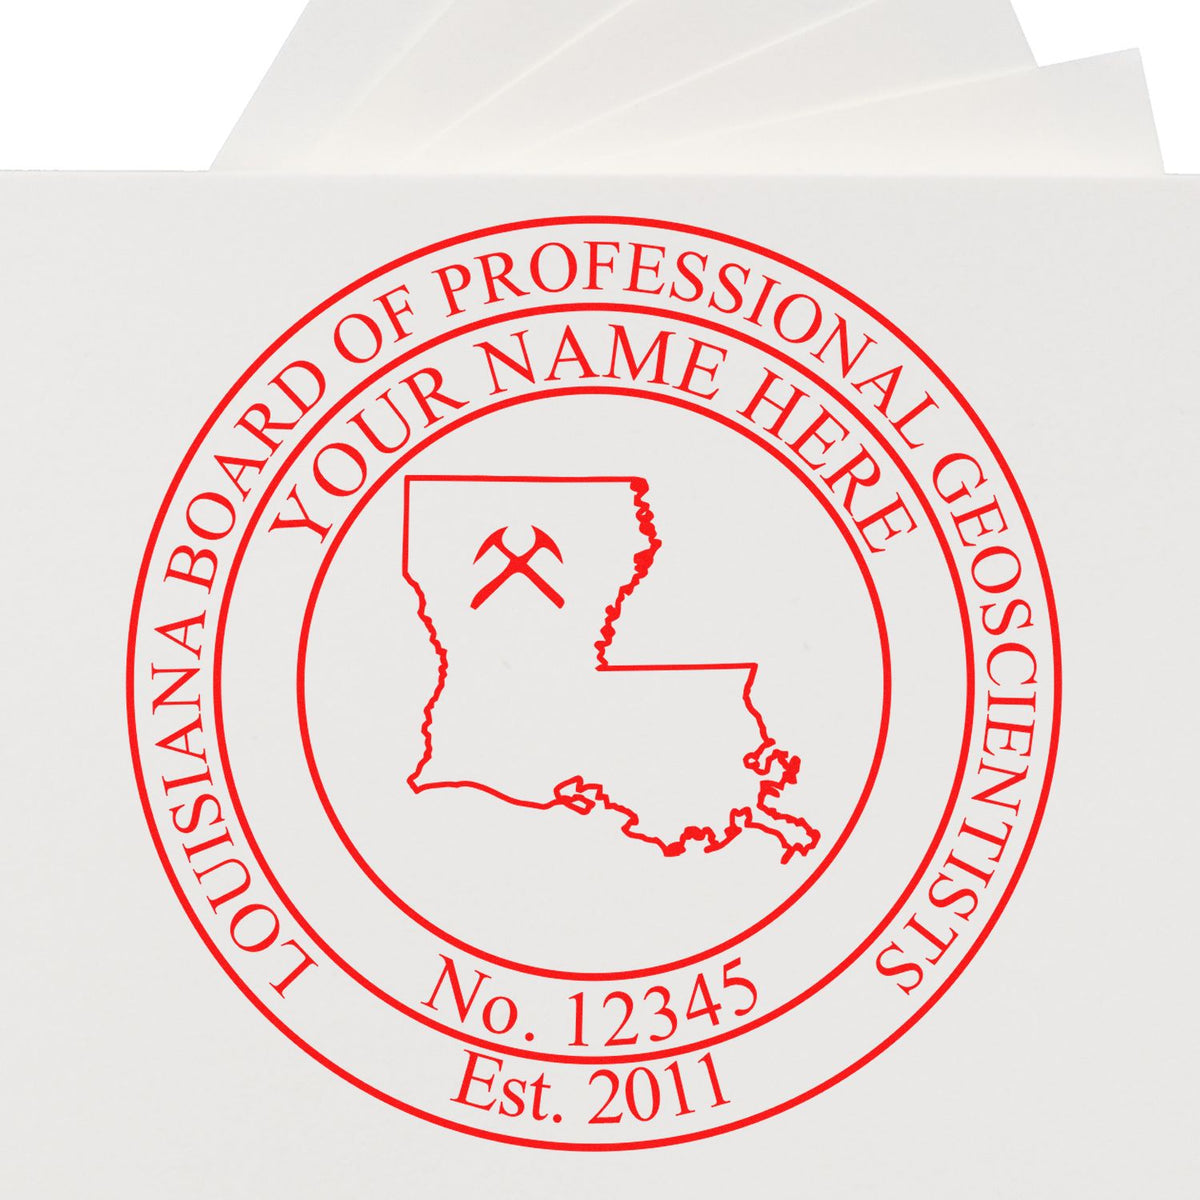 The Premium MaxLight Pre-Inked Louisiana Geology Stamp stamp impression comes to life with a crisp, detailed image stamped on paper - showcasing true professional quality.